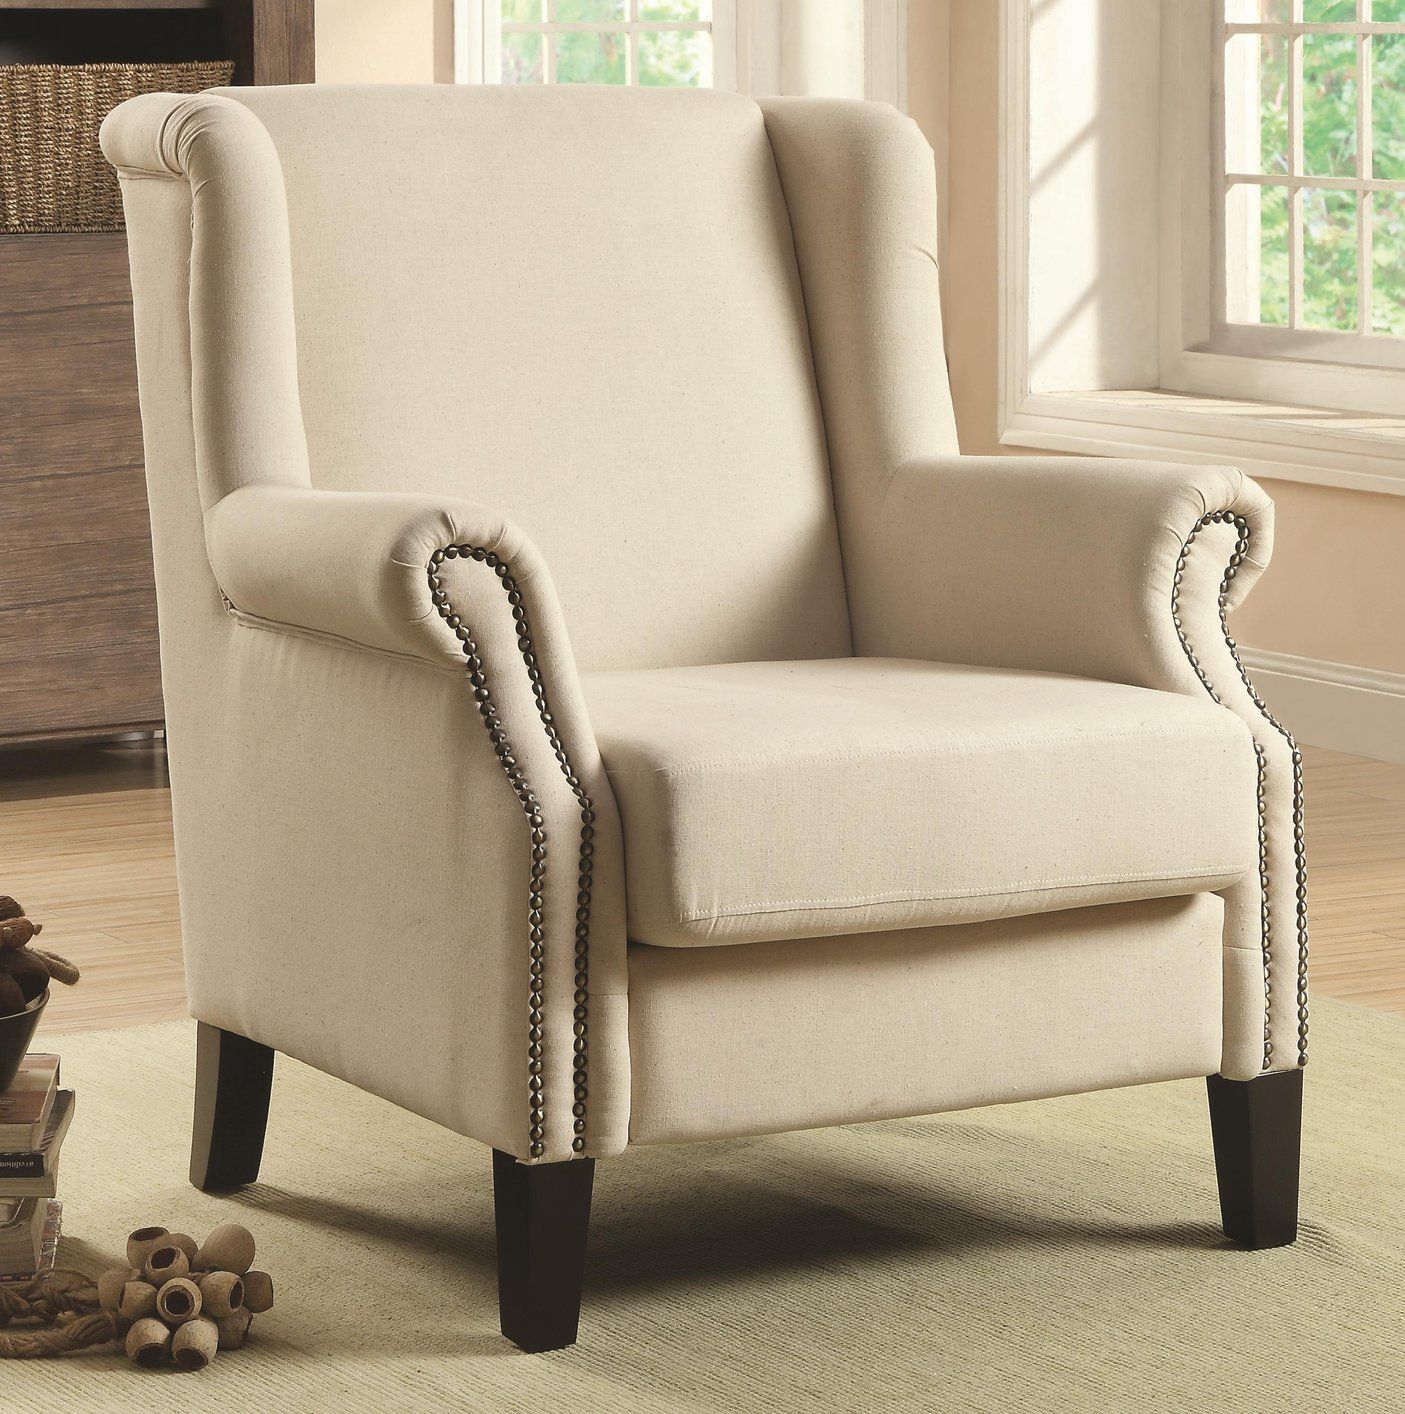 Coaster 902229 Beige Fabric Accent Chair – Steal A Sofa Furniture In Light Beige Round Accent Stools (View 2 of 20)